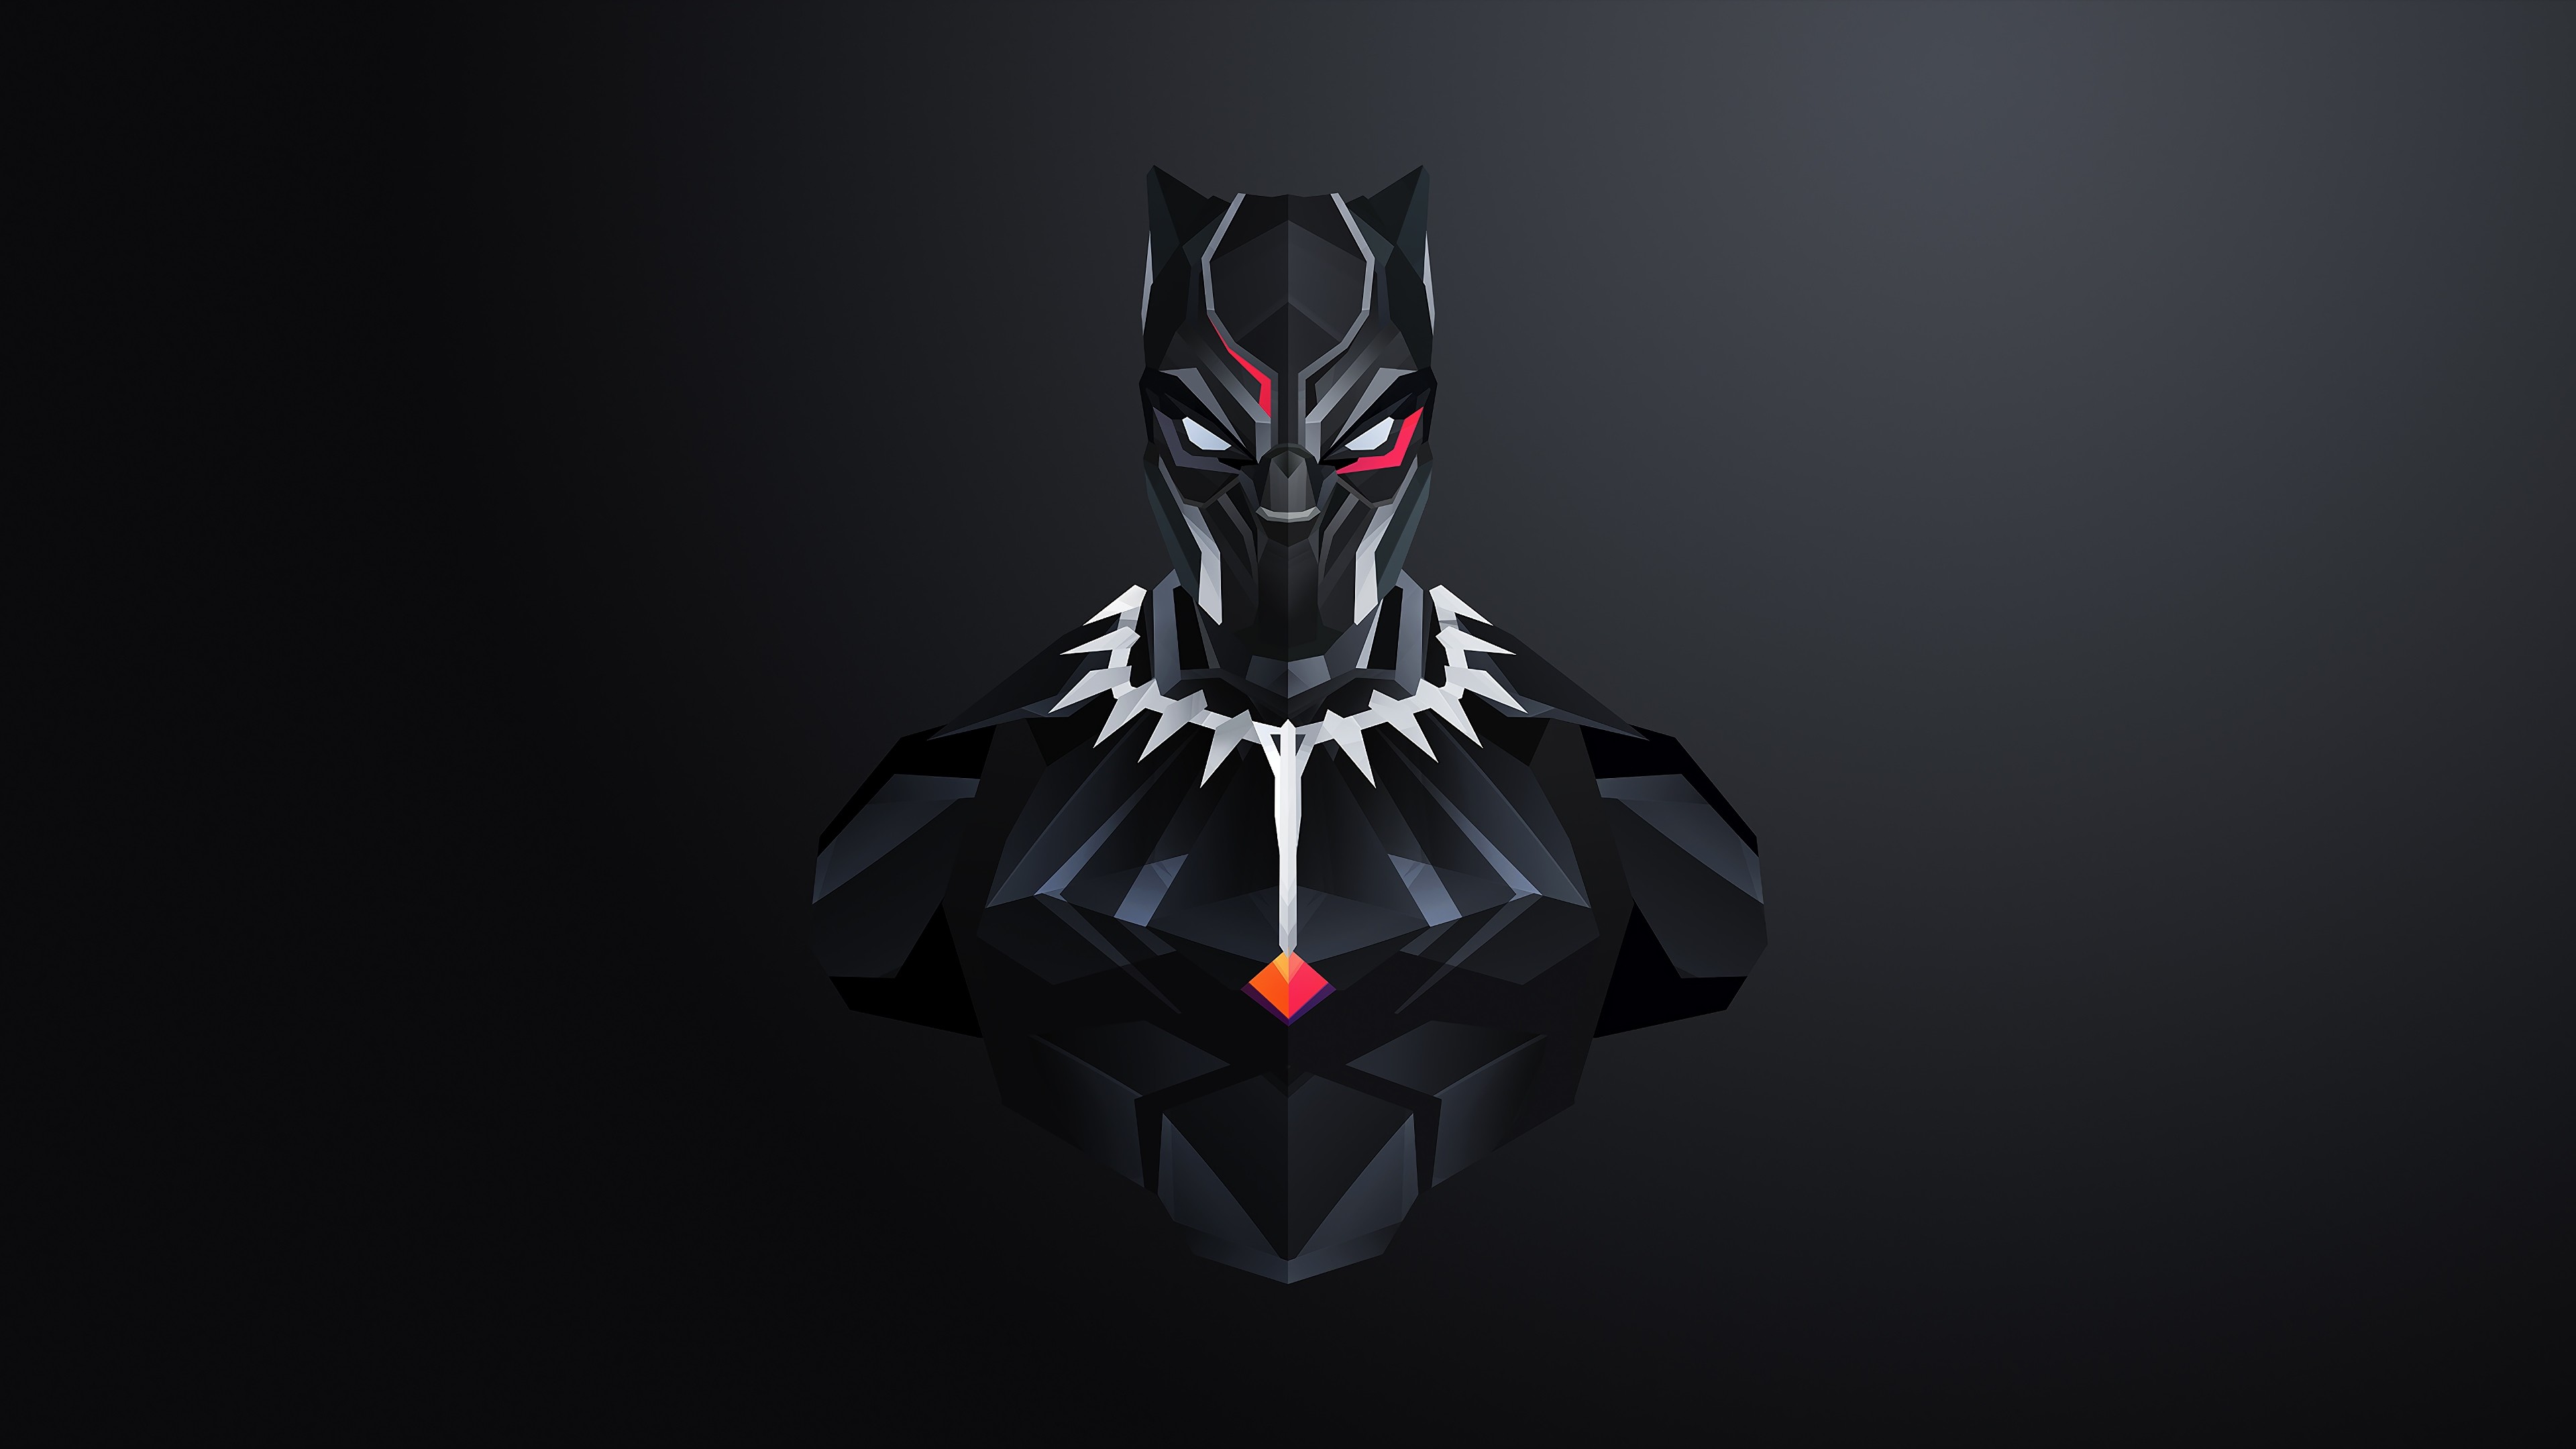  Black  Panther  Wallpapers  67 pictures 